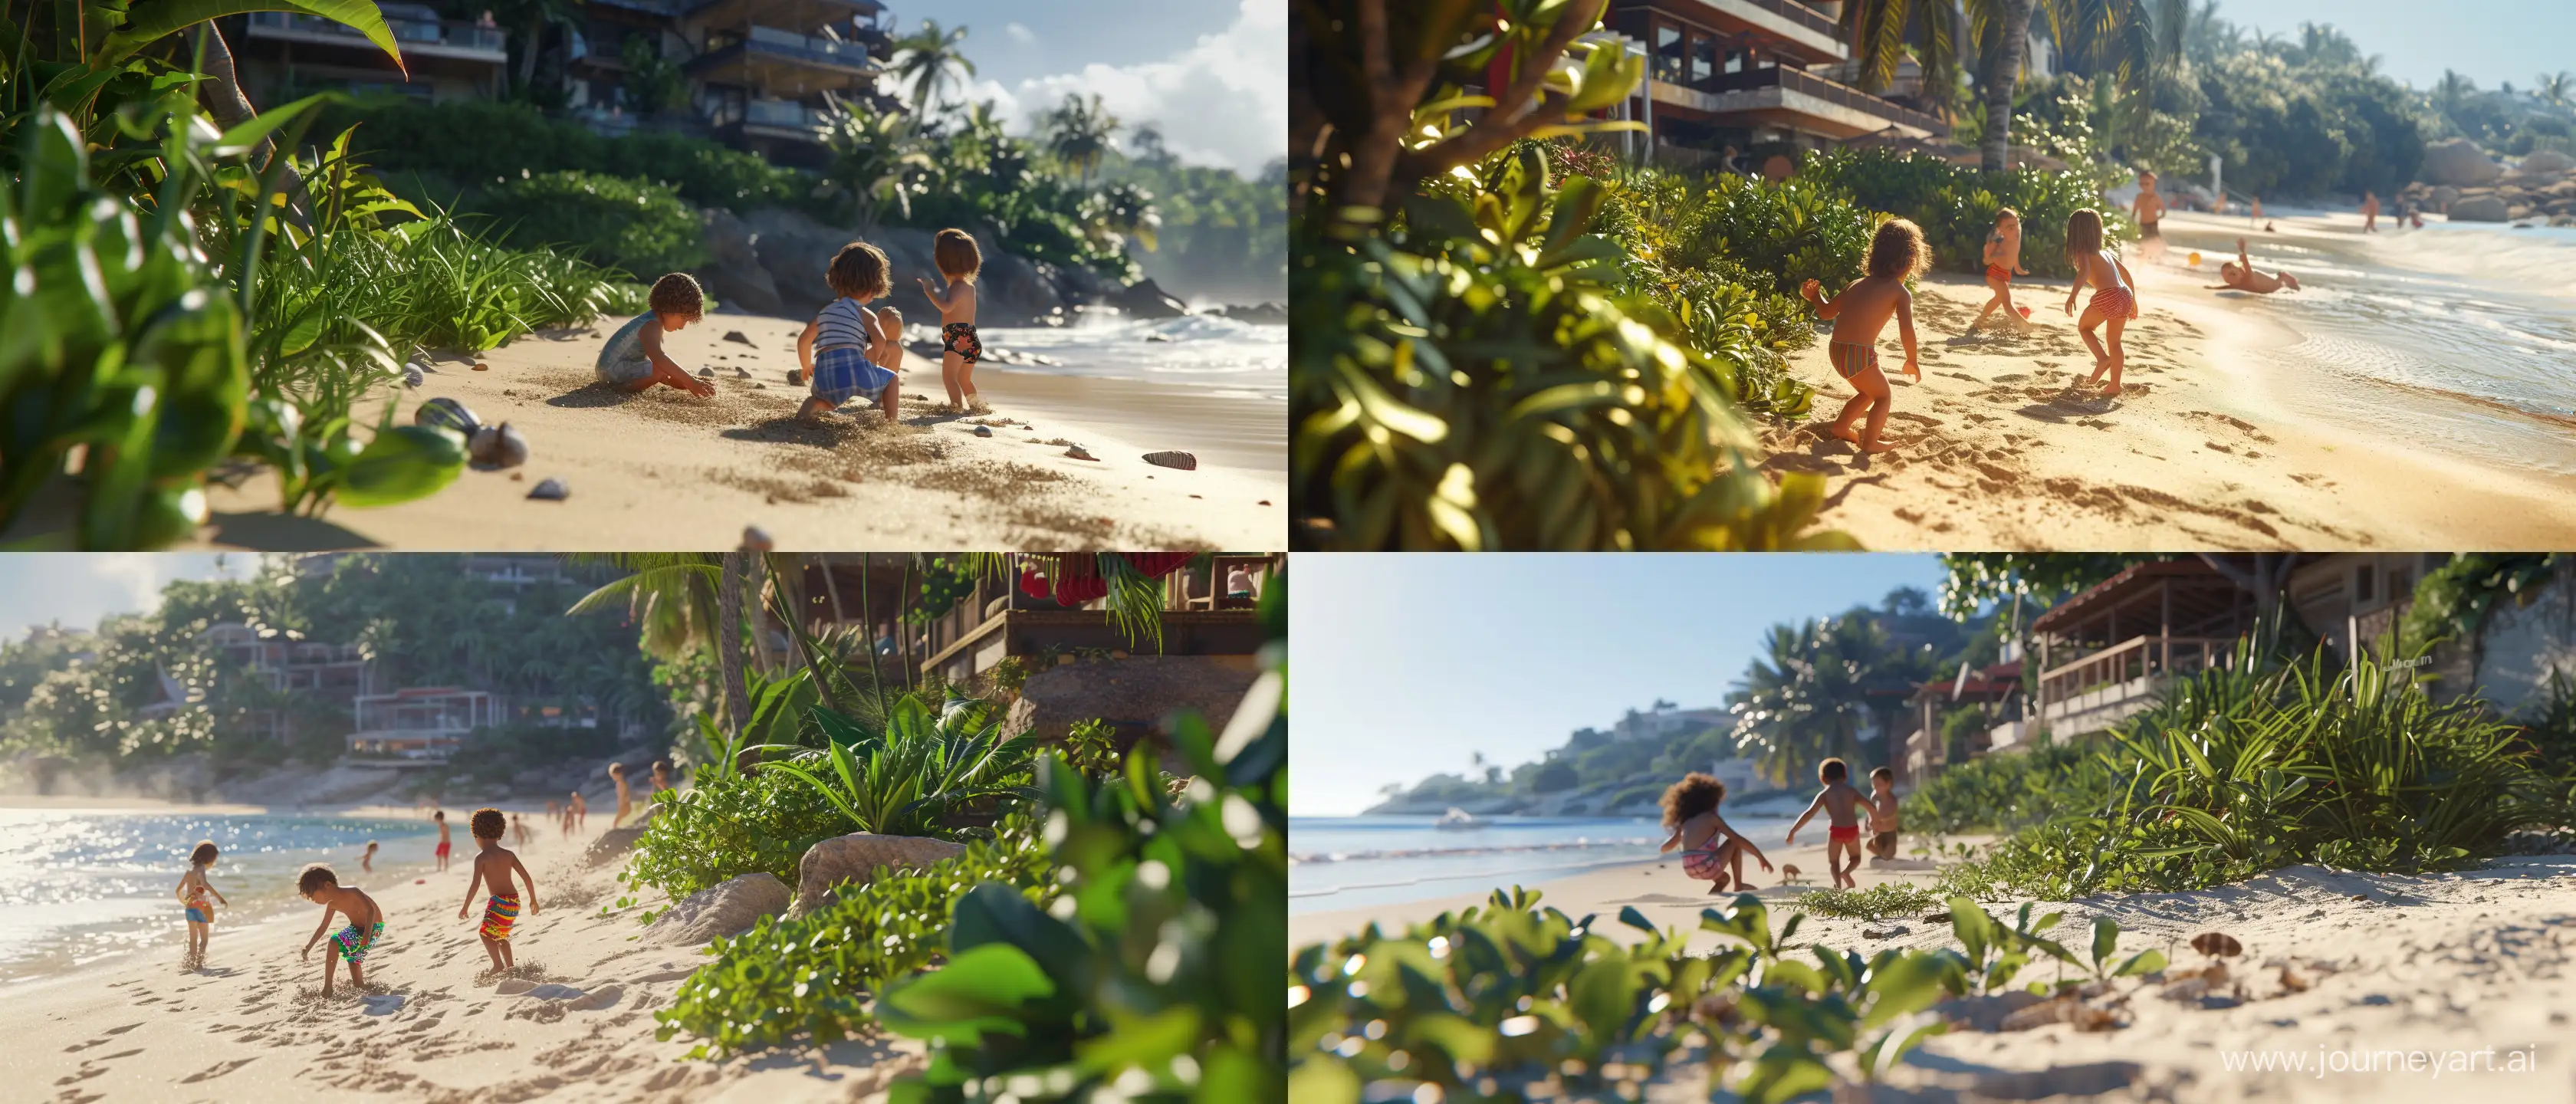 HyperRealistic-Children-Playing-on-Sunny-Beach-with-Vegetation-and-Buildings-in-Background